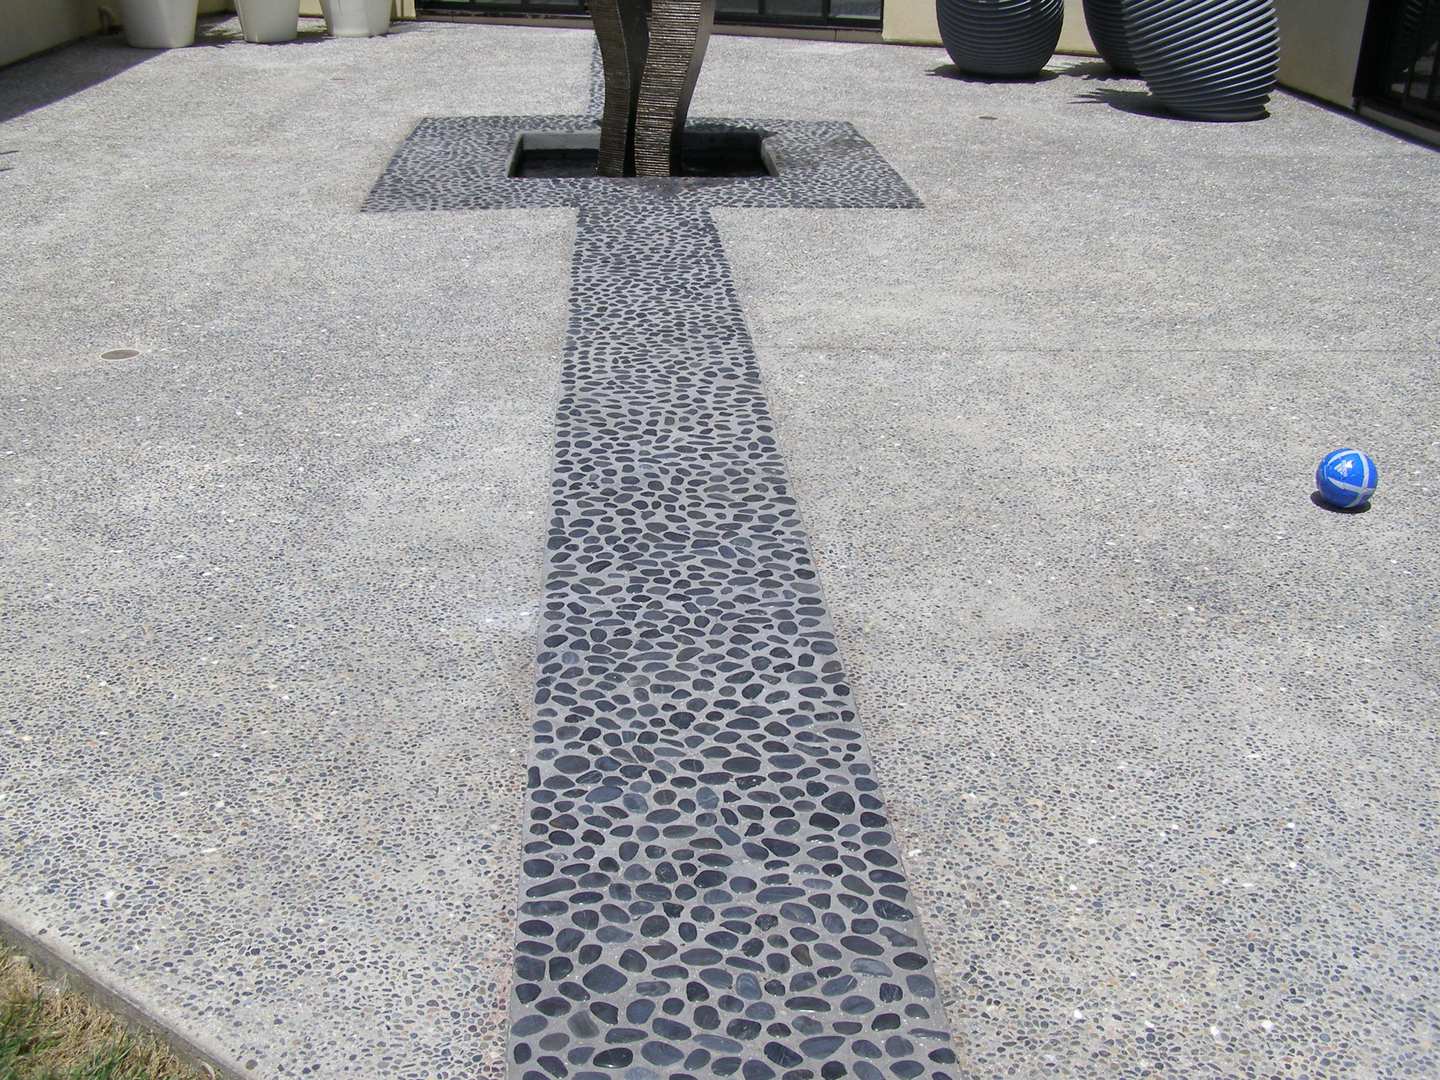 A Chip Floor With Design Pattern for Residential Outdoors